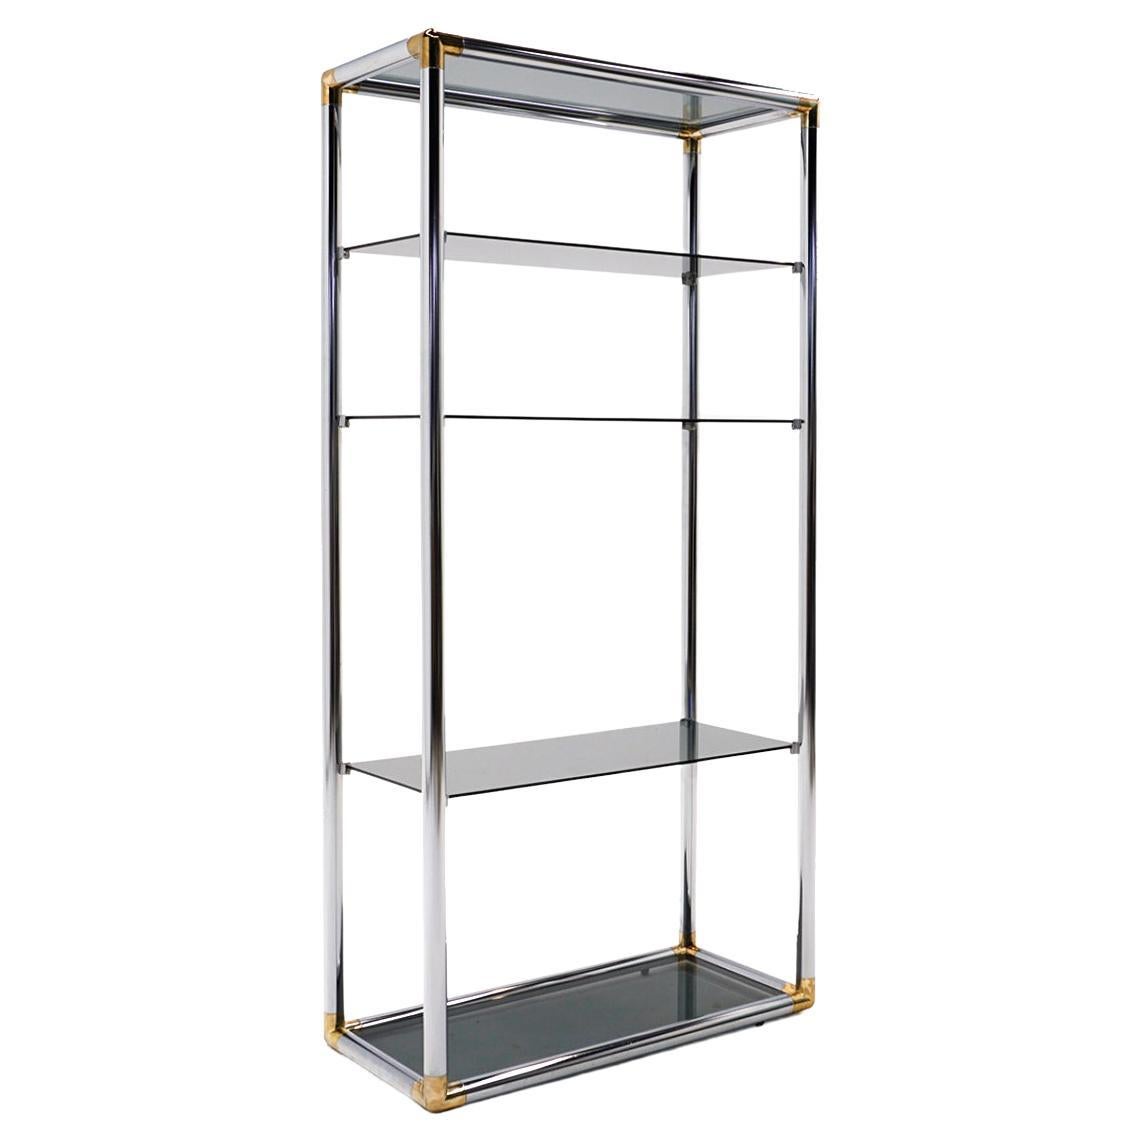 Storage / Display Etagere in Chrome and Brass with Smoked Glass Shelves